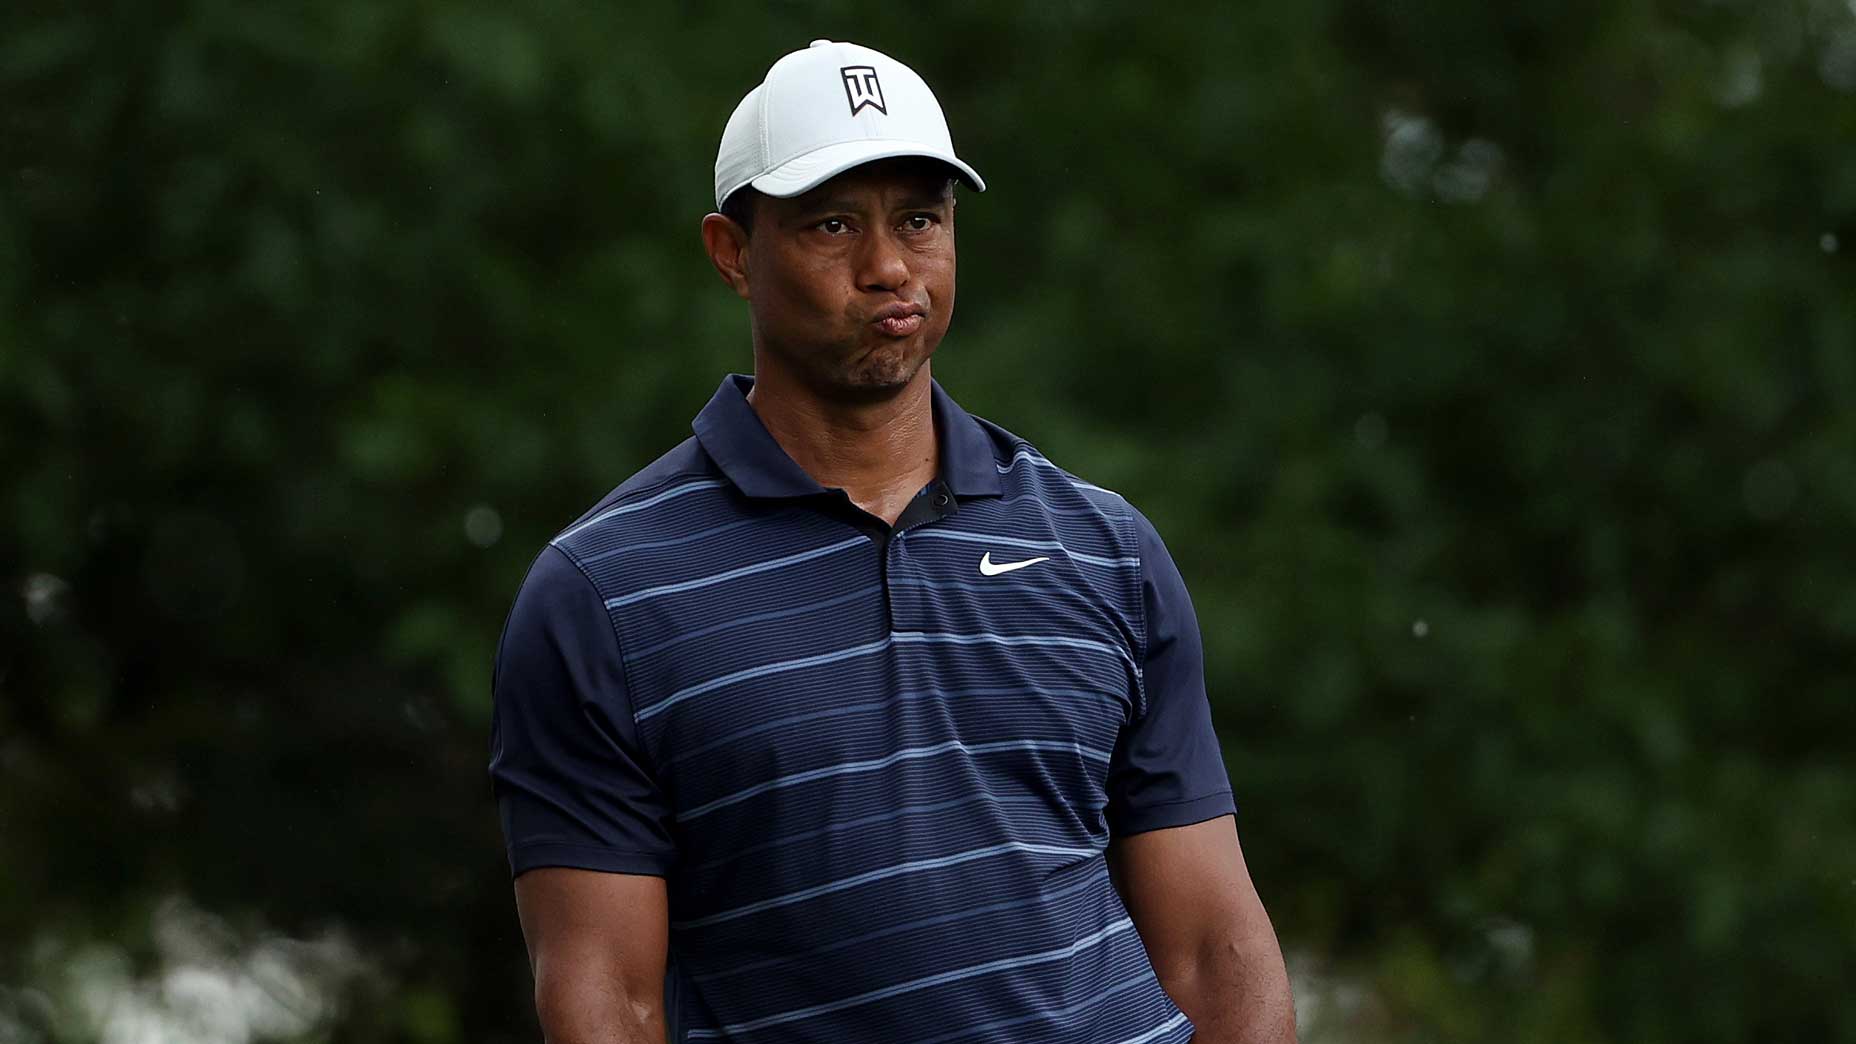 Tiger Woods looks at camera during Masters tournament